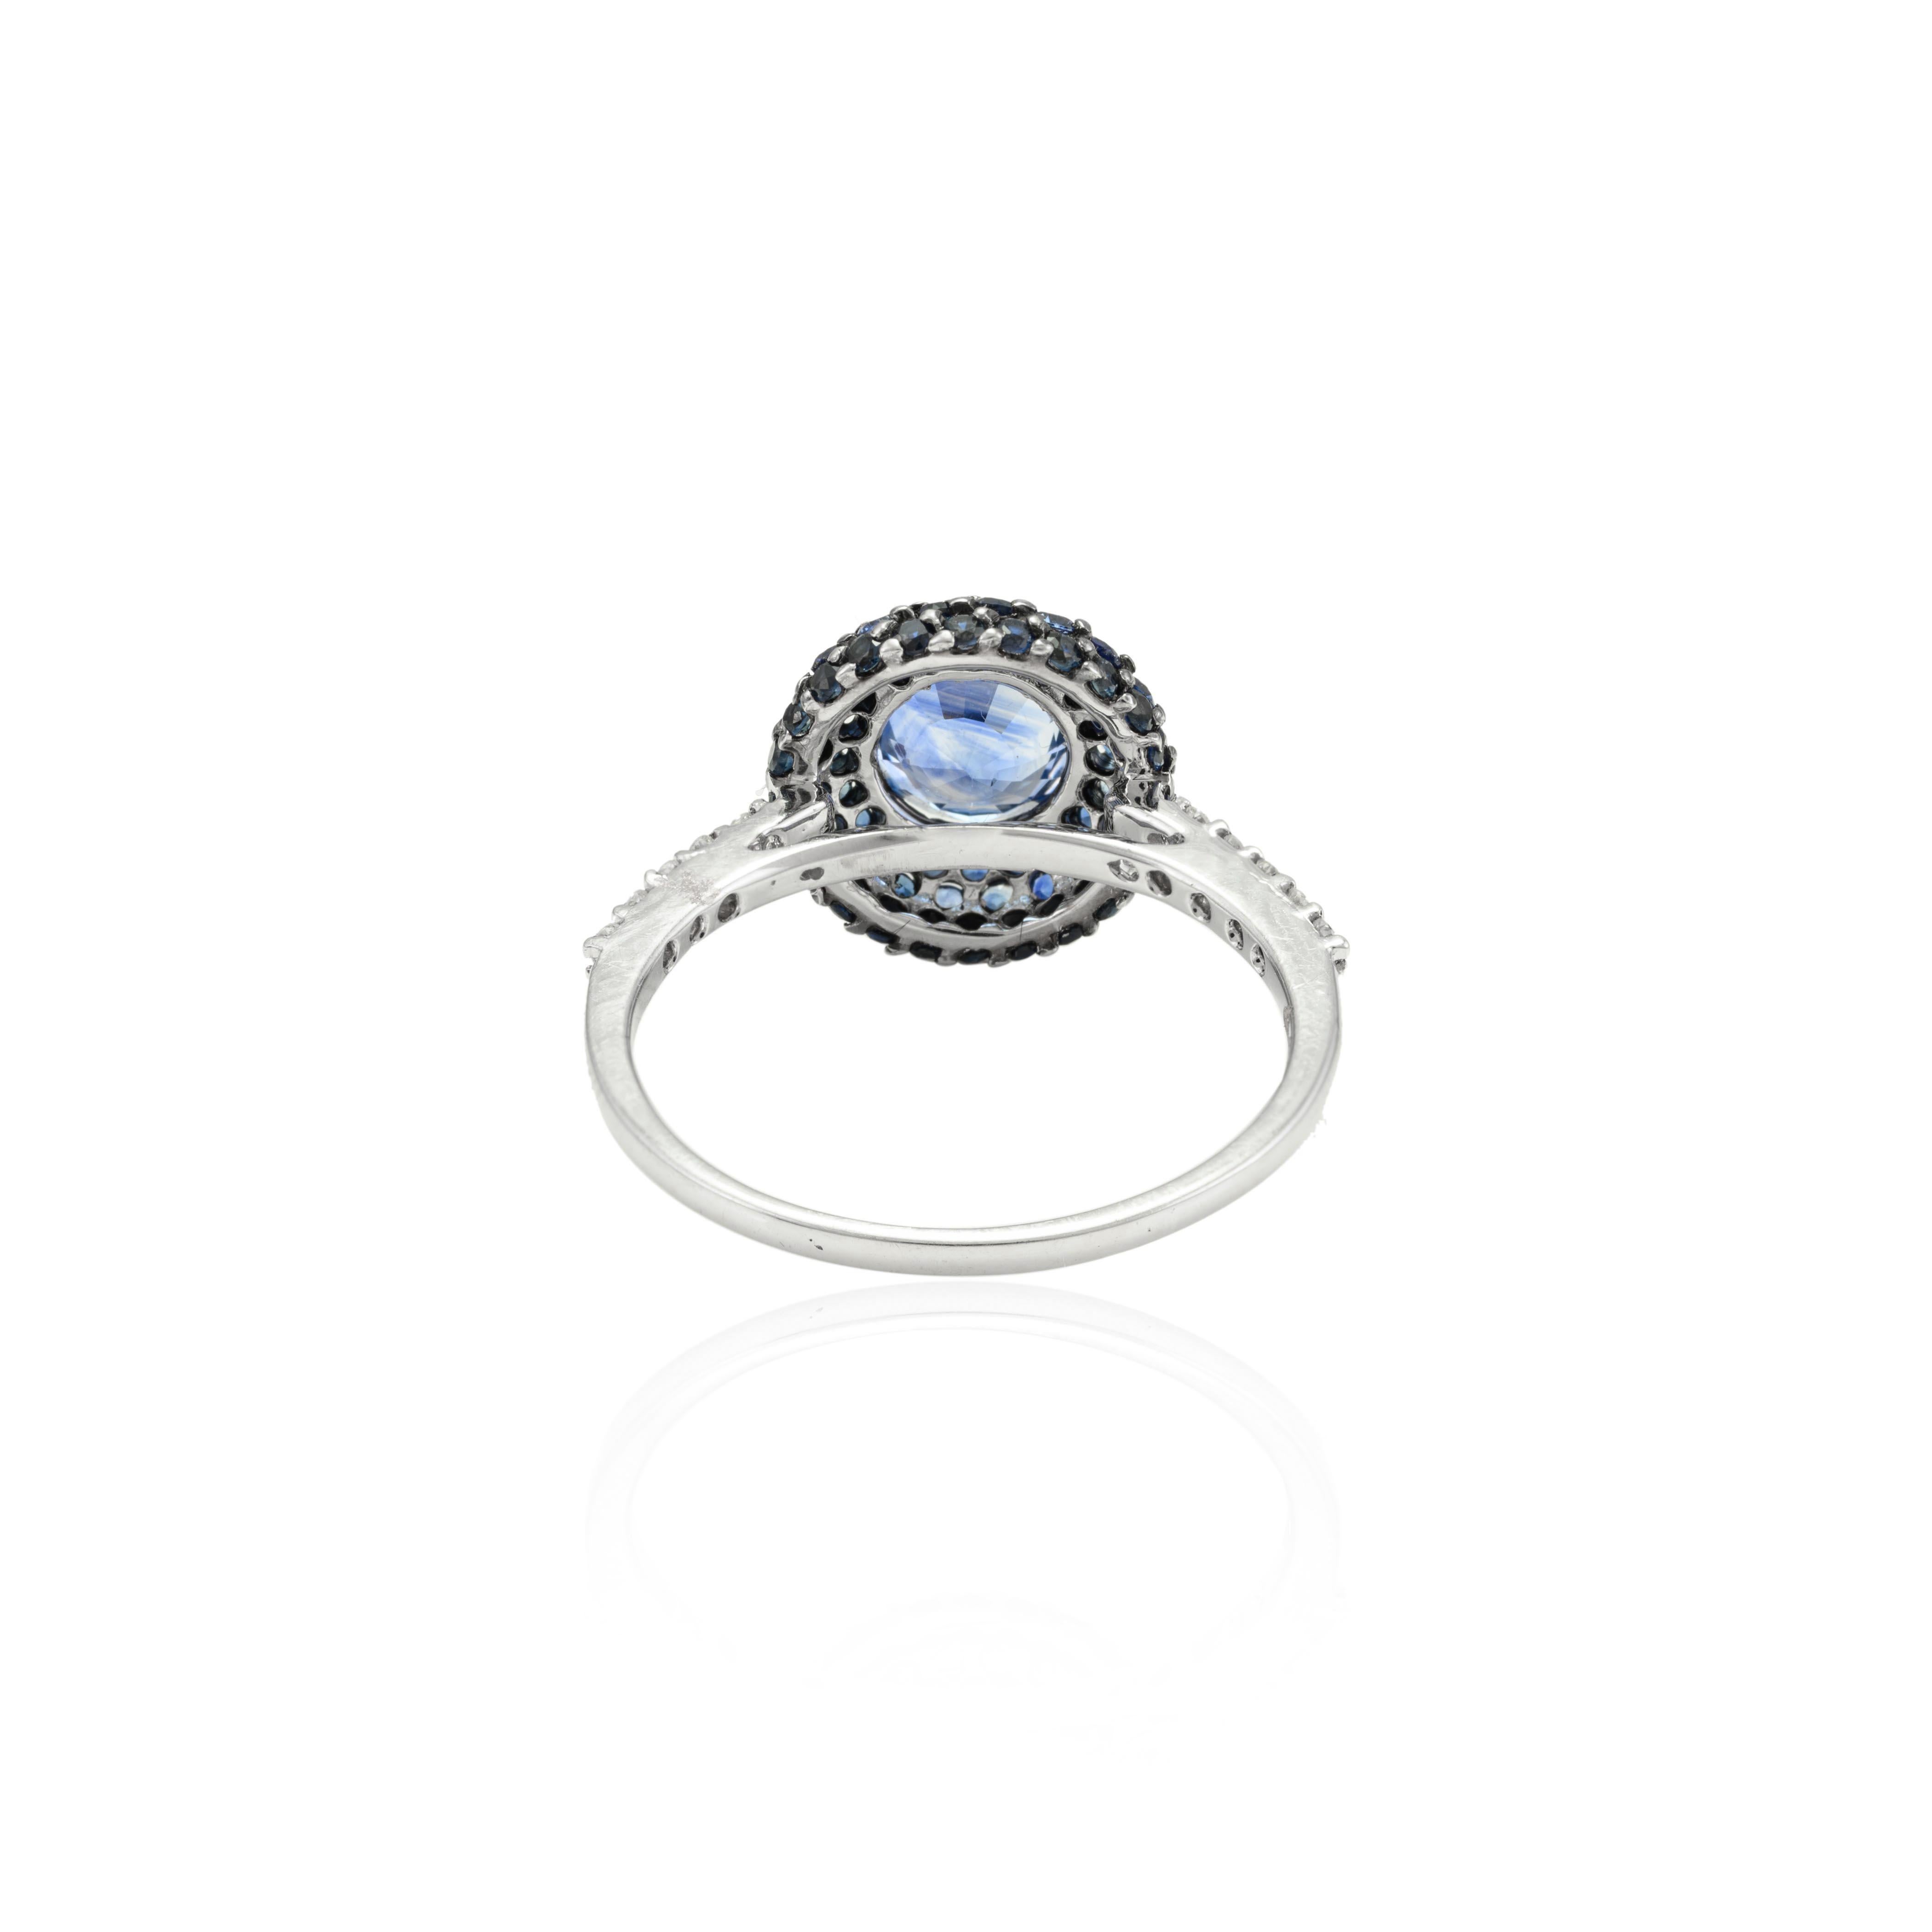 For Sale:  2.58 Ct Round Pave Blue Sapphire Ring in 18k Solid White Gold with Diamonds 7